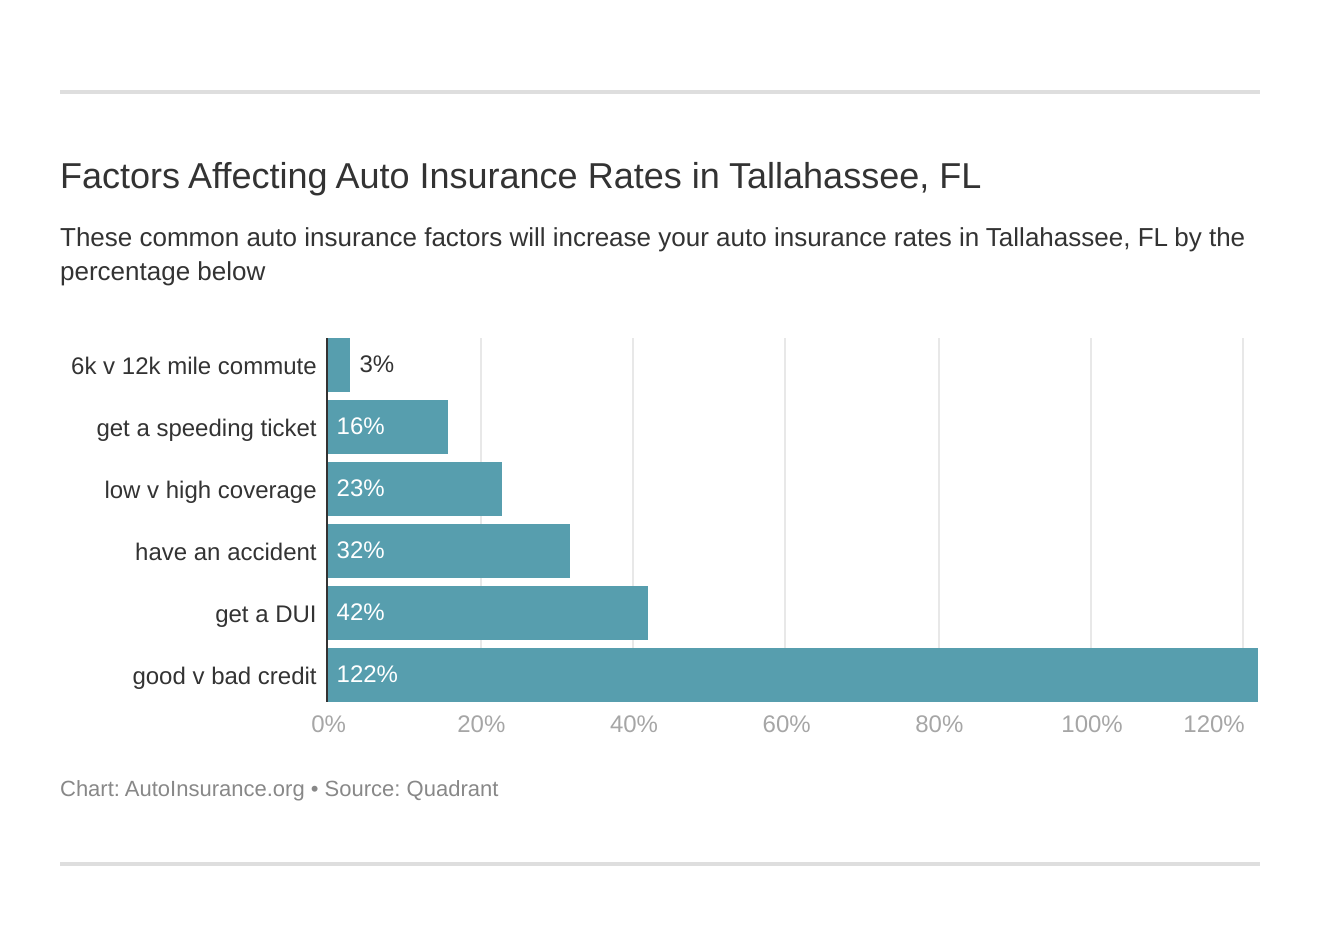 Factors Affecting Auto Insurance Rates in Tallahassee, FL